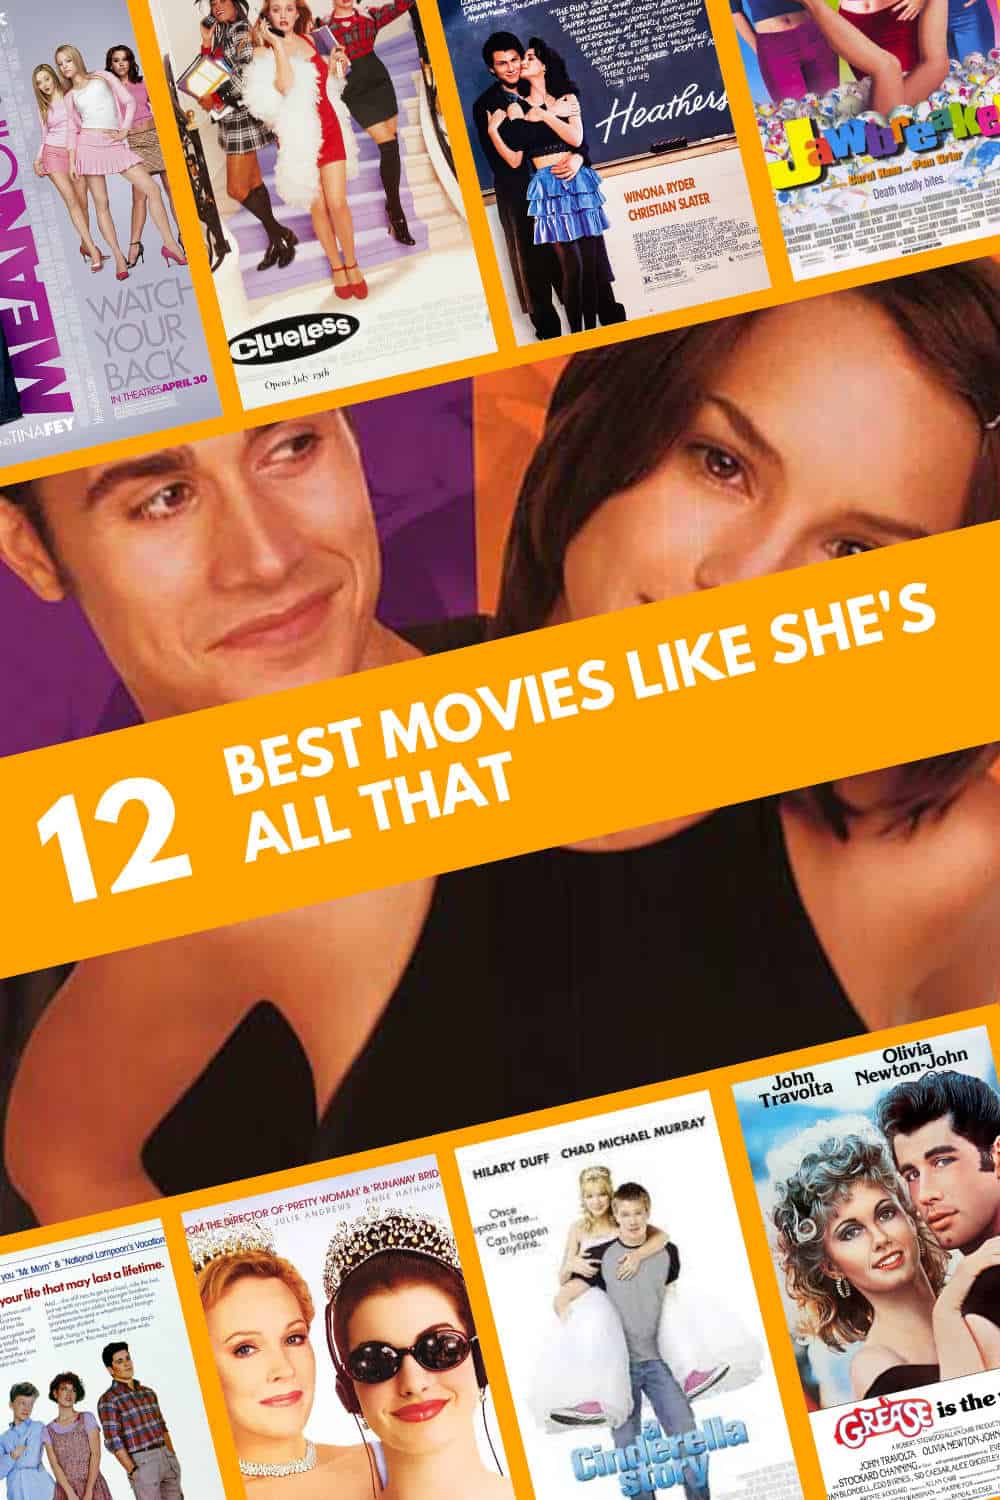 Movie Like She's All That